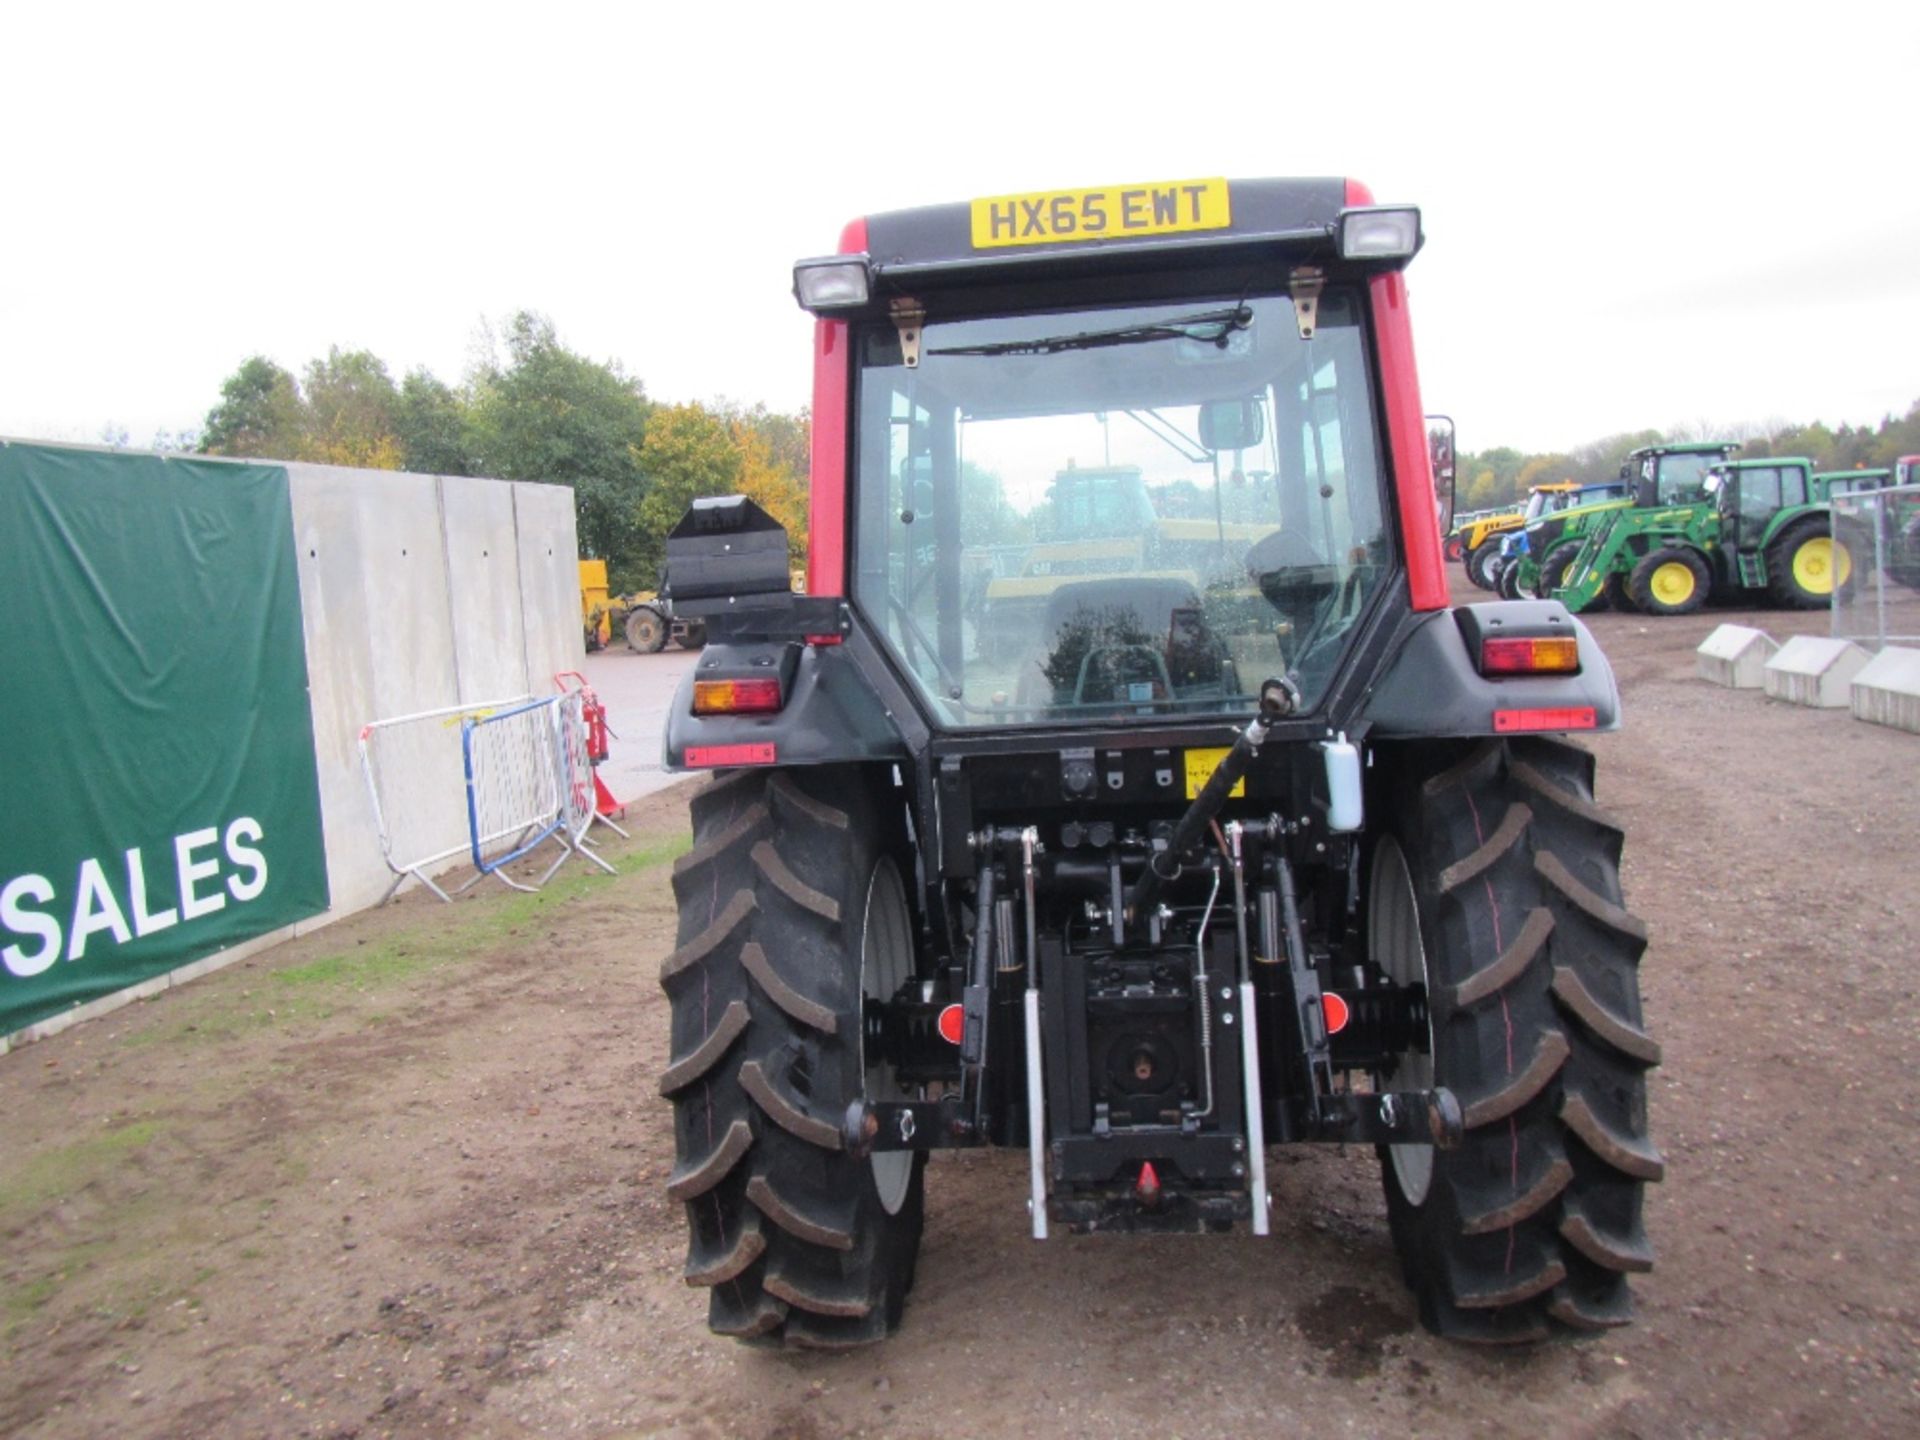 2015 Valtra A73C 4wd Tractor 40k, 12+12 Synchro, Mechanical Shuttle, 2 Spools, Air Con, 540/540E - Image 6 of 17